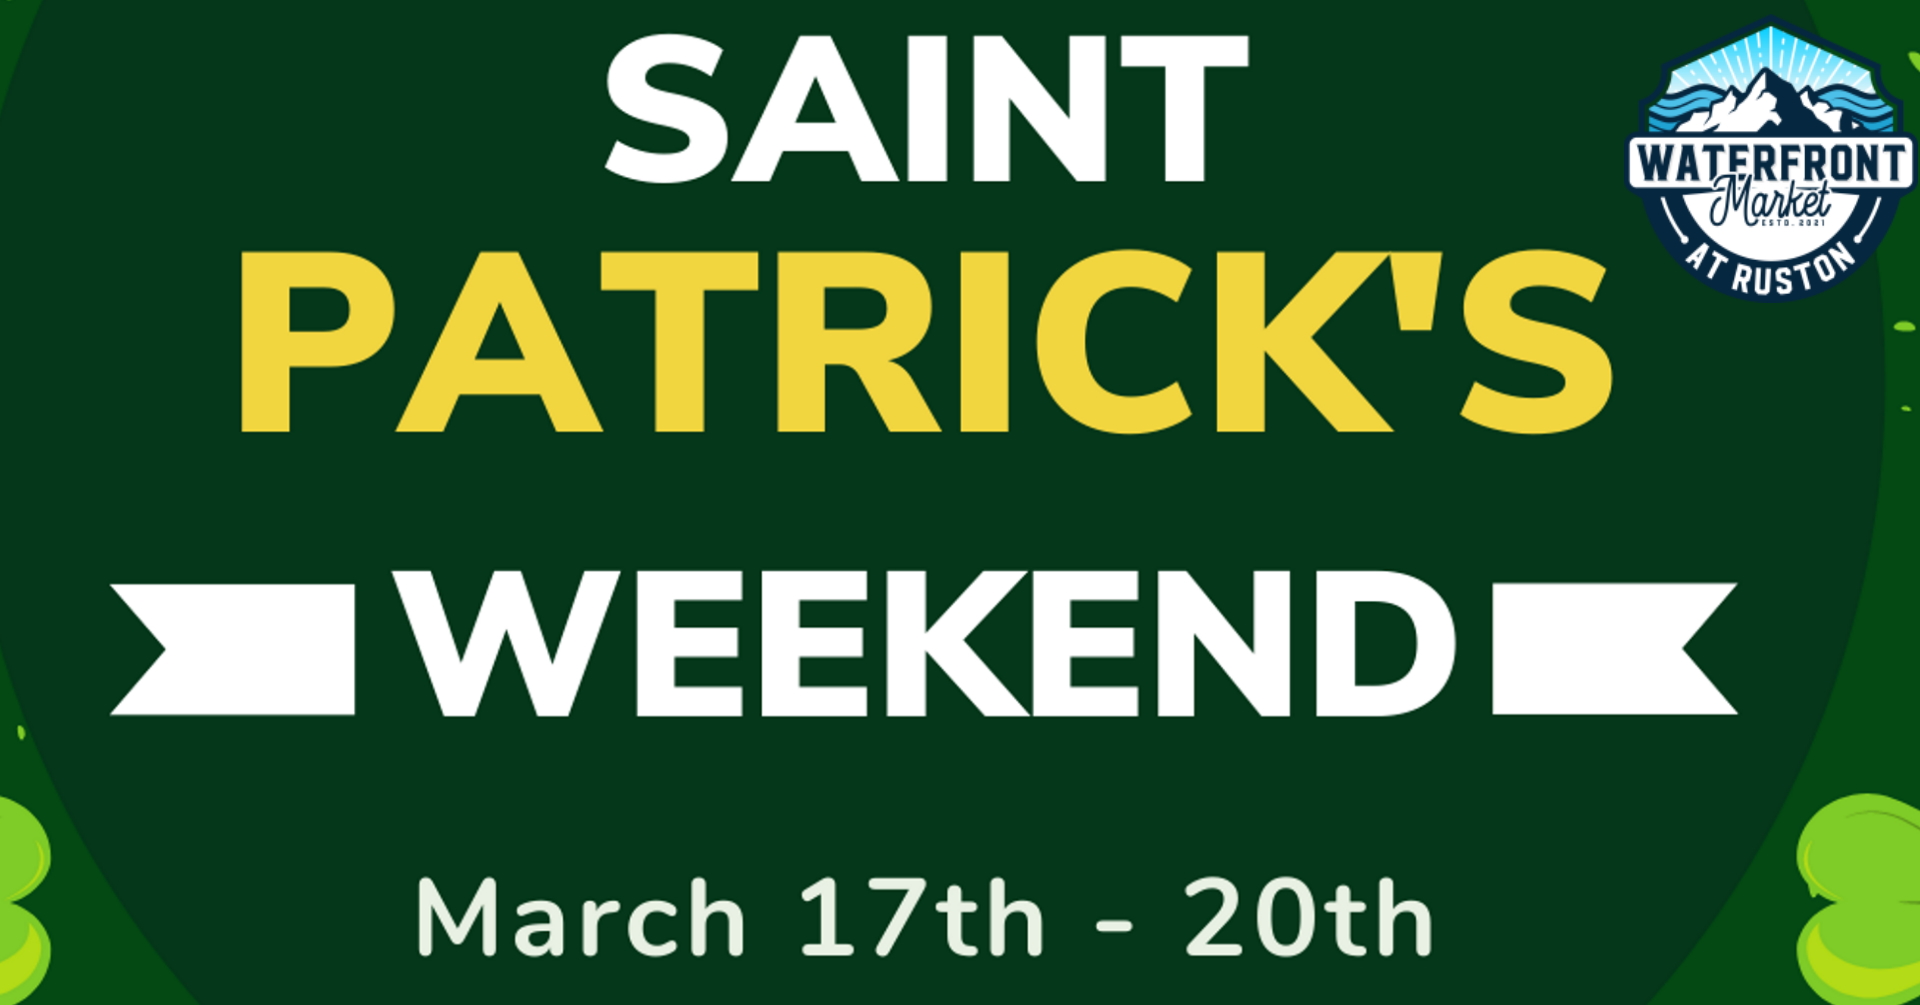 St. Patrick's Day Weekend community event at Waterfront Market at Ruston